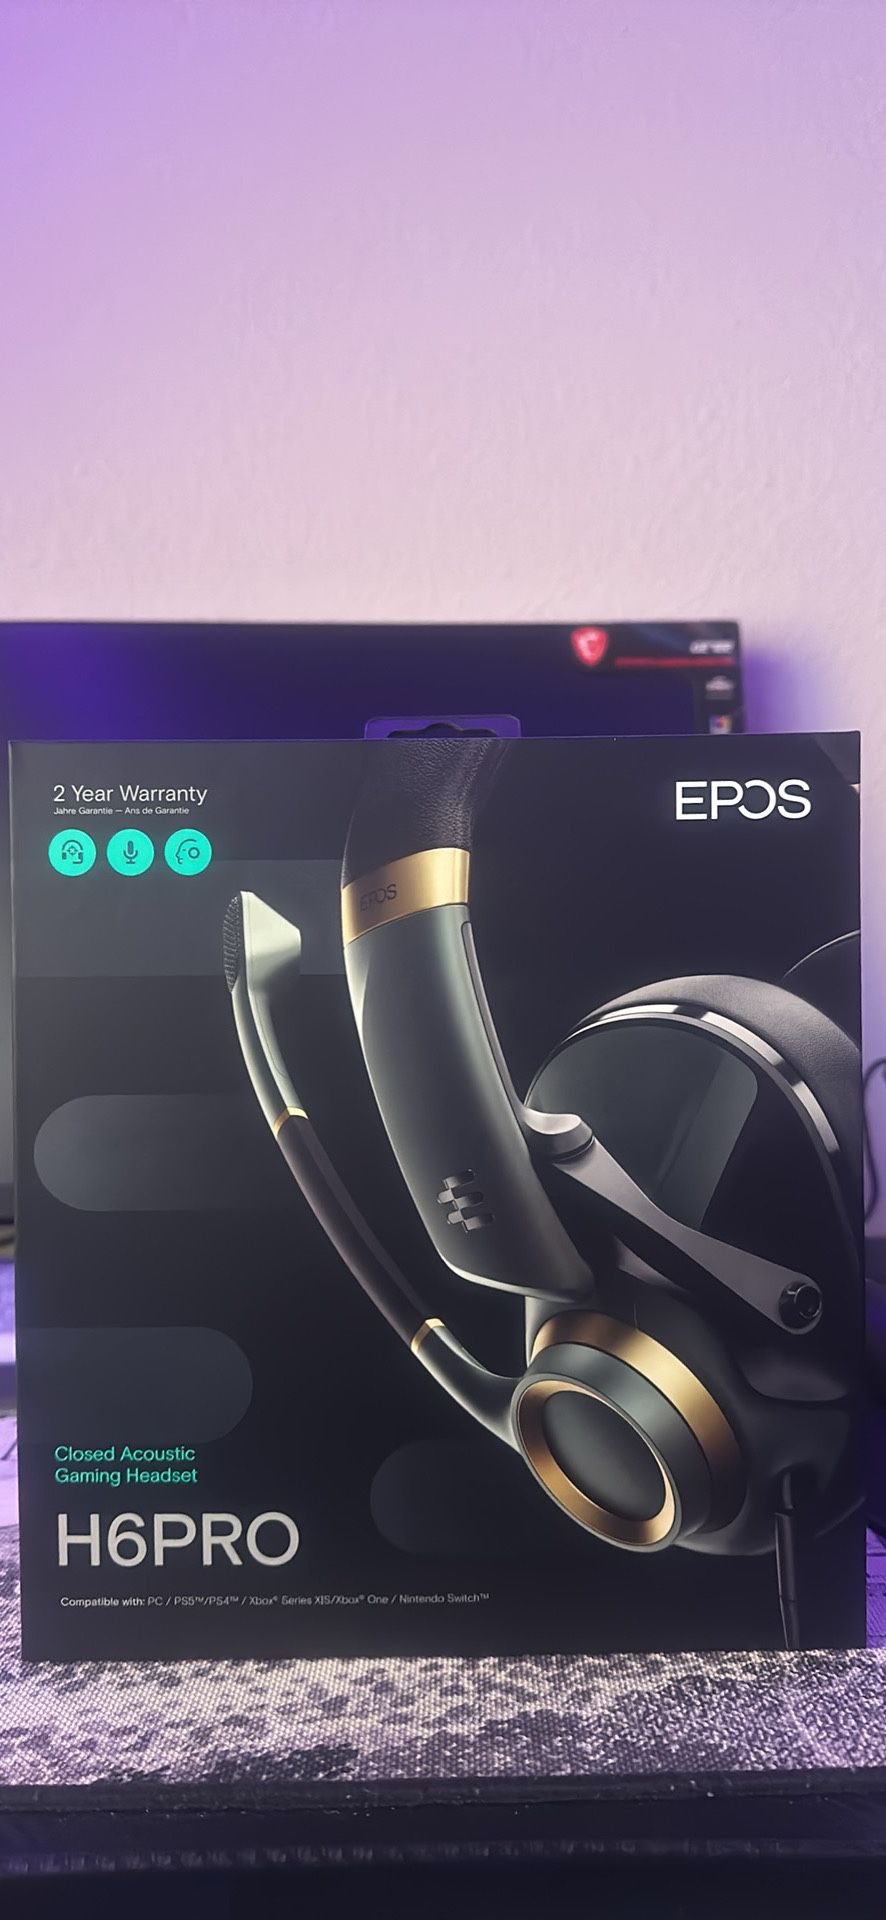 New/Sealed EPOS H6Pro - Closed Acoustic Gaming Headset with Mic